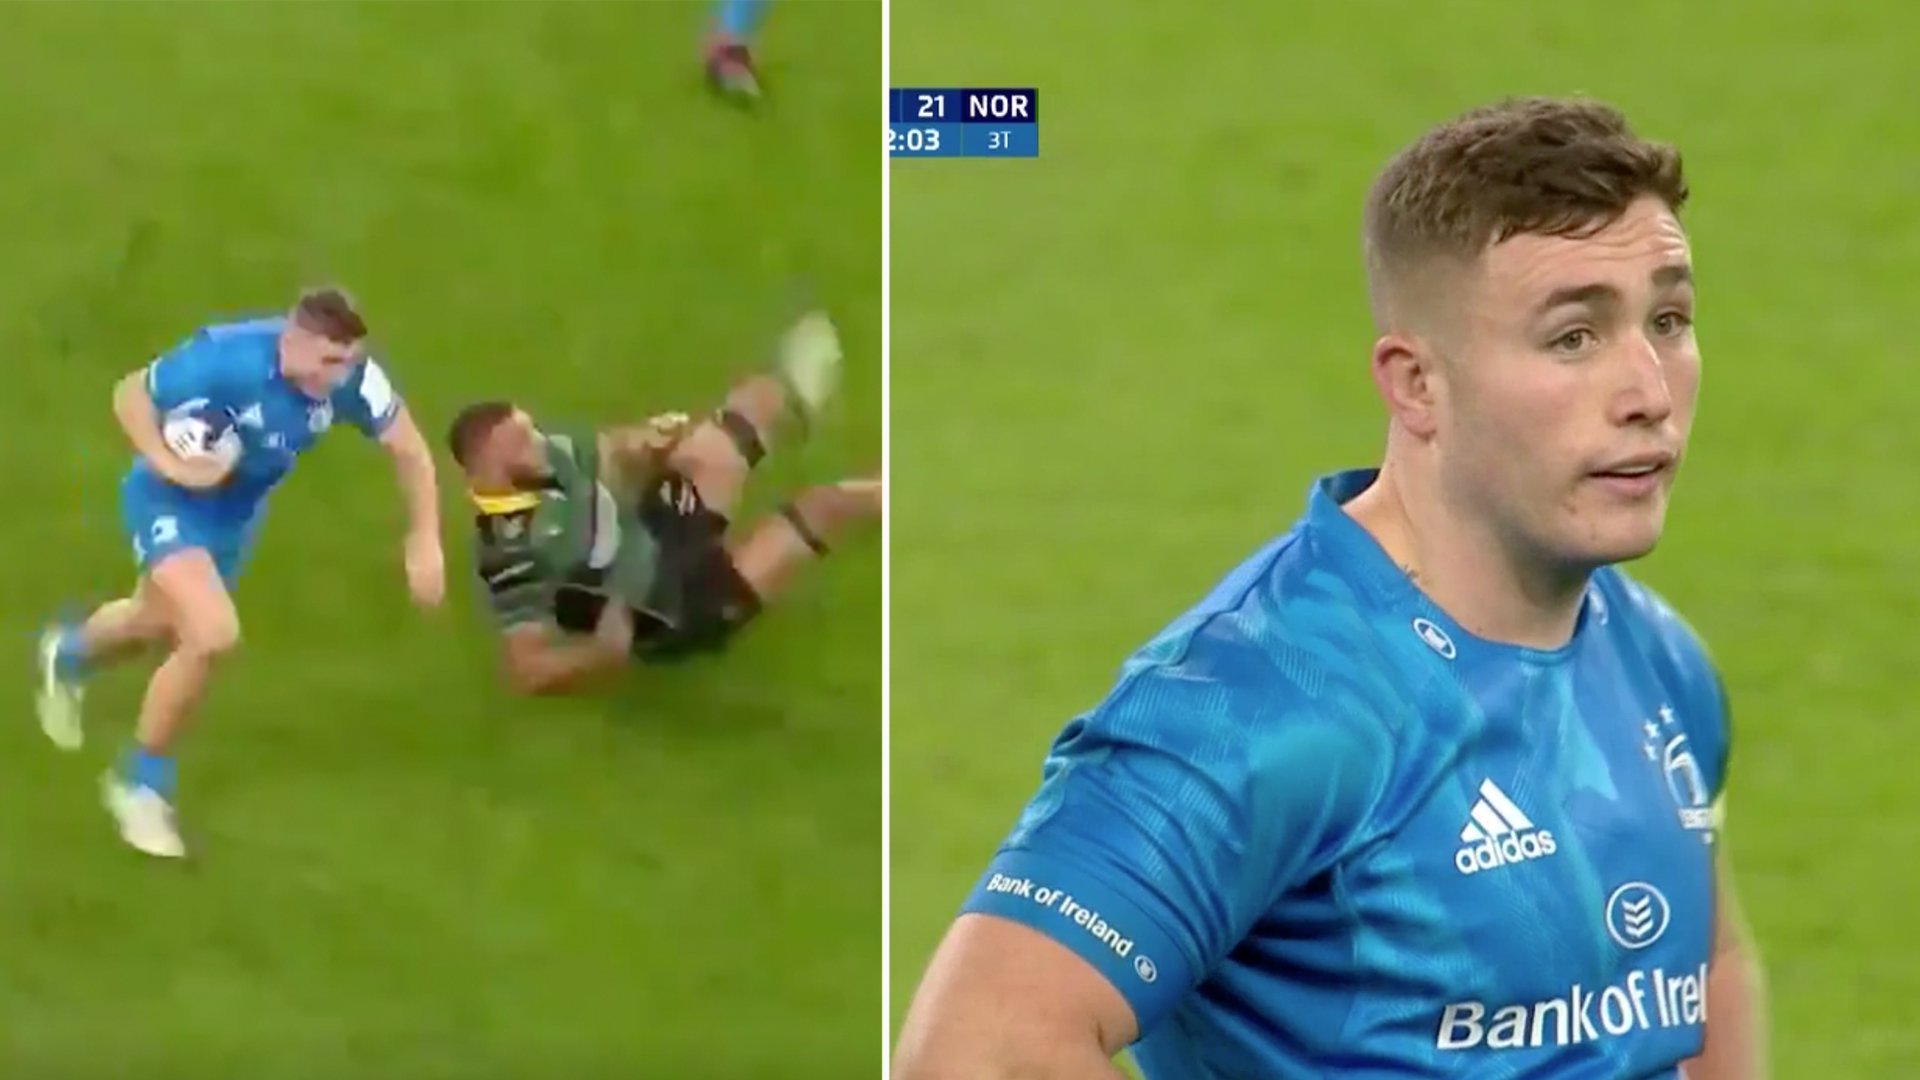 Calls for Larmour to be banned from rugby entirely after he humiliates 7 players and their families